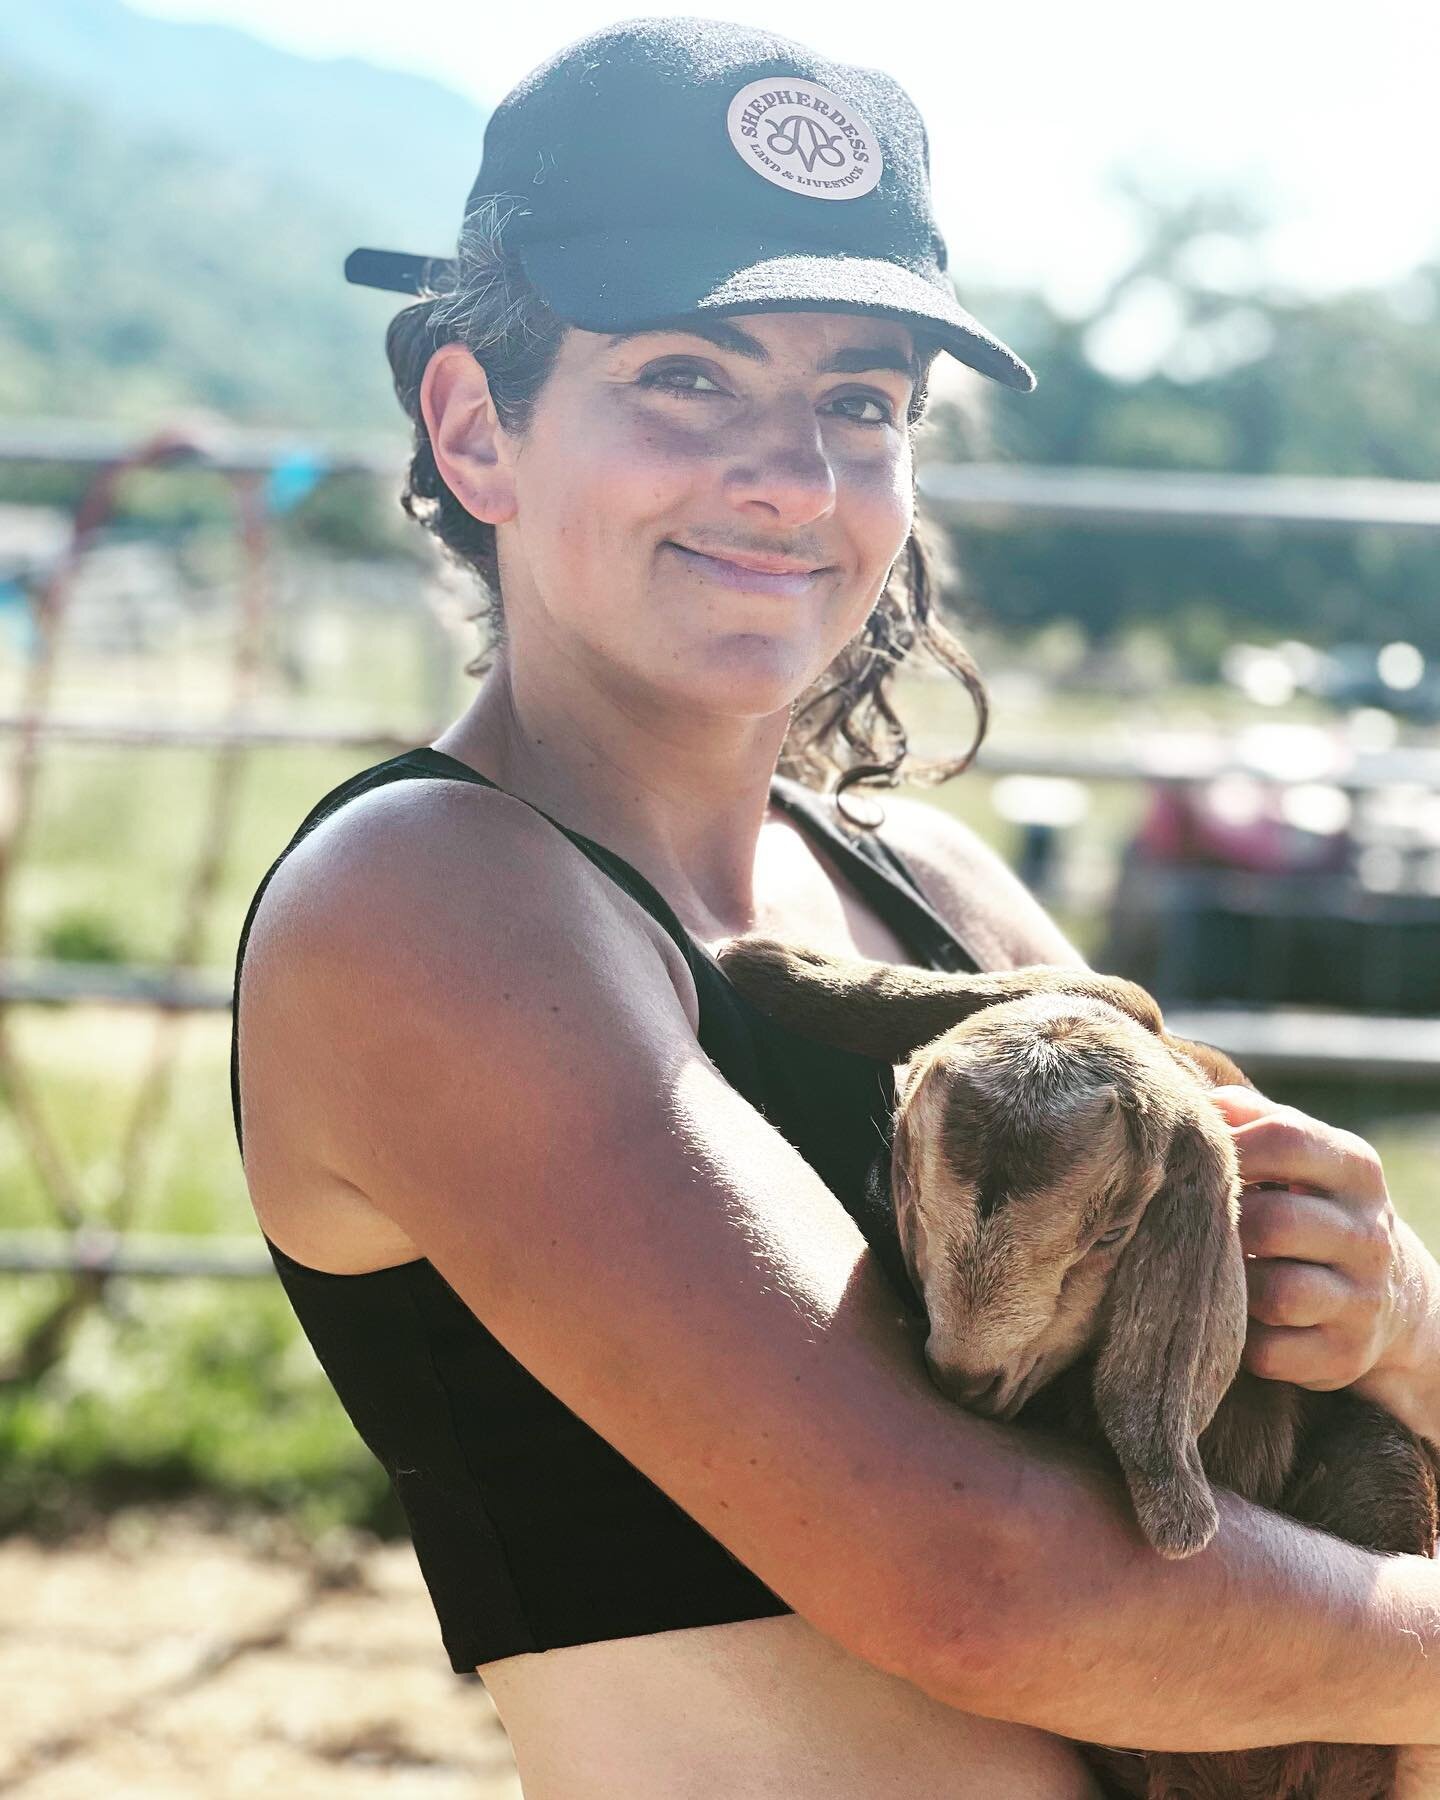 Our dairy goat, Alice had her kids and we are so joyful. Baby goats and goat milk!! It&rsquo;s gonna be a good spring.

Ranch shep daddy @dianeanastasio exhibits our bliss with future @ojaigoatyoga guest yoga instructor support animal.

#goat #ranchd